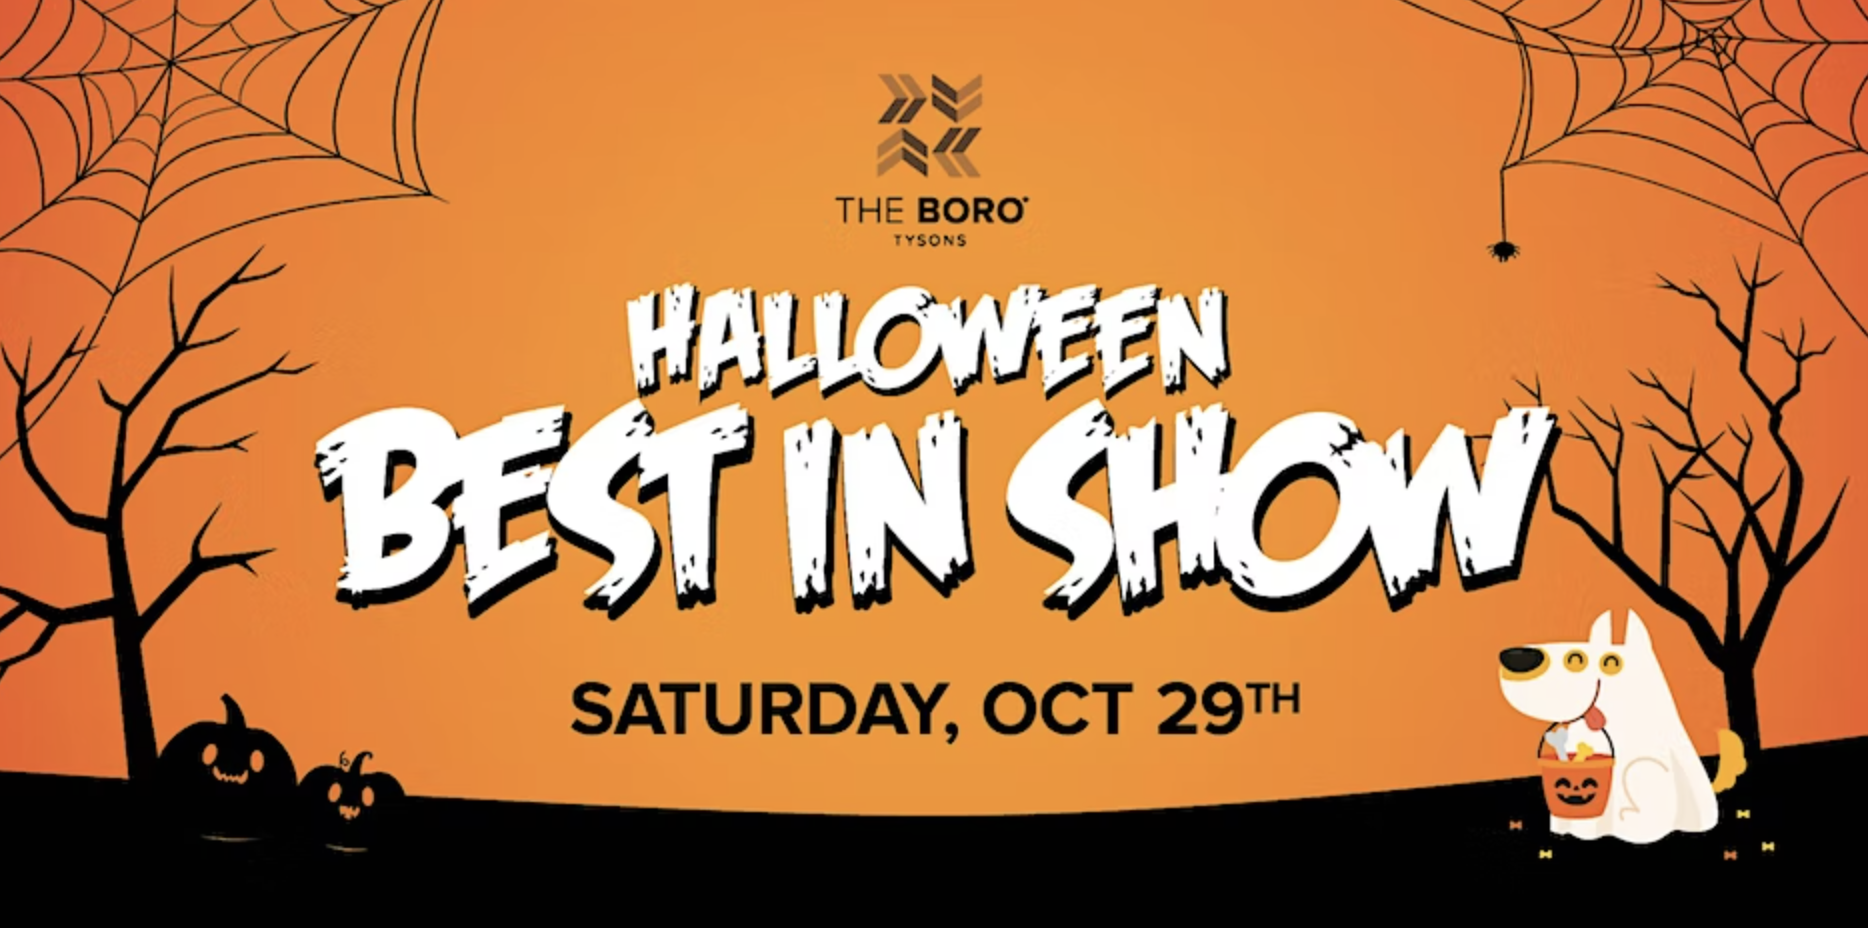 Best in show: Halloween dog costume contest and spooky celebration